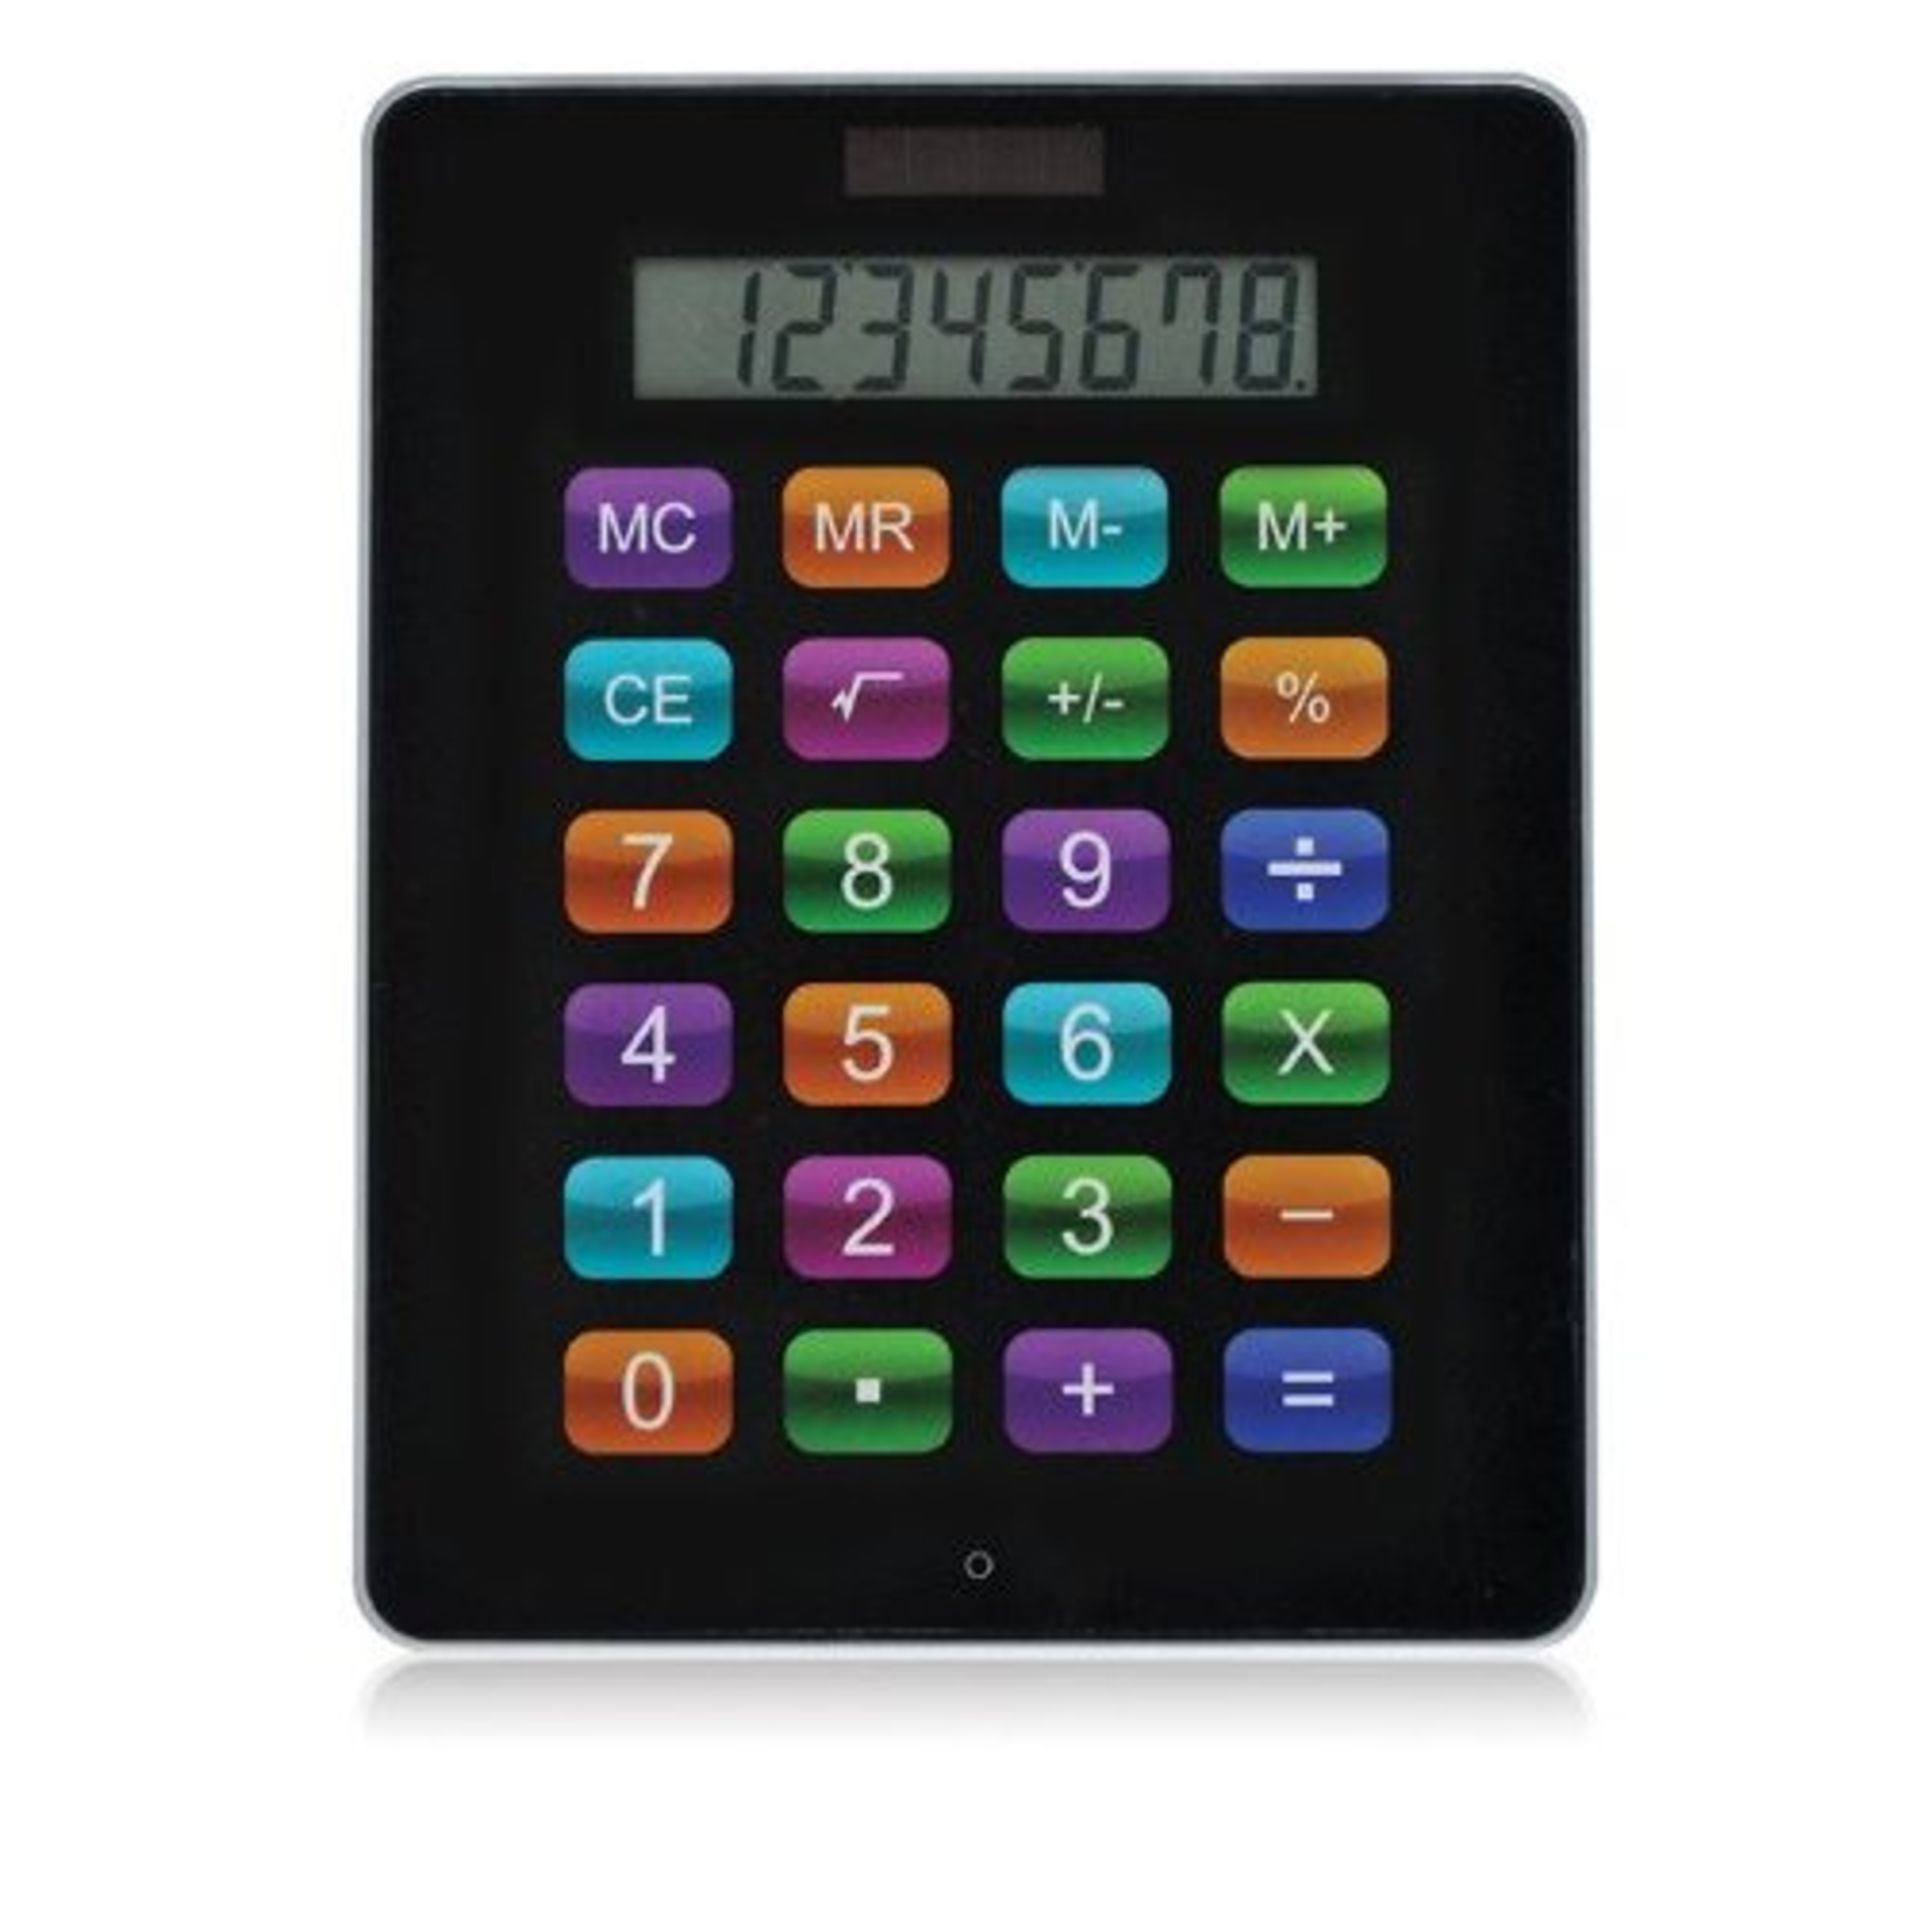 V *TRADE QTY* Brand New Ipad Calculator-Battery powered with solar backup X 4 YOUR BID PRICE TO BE